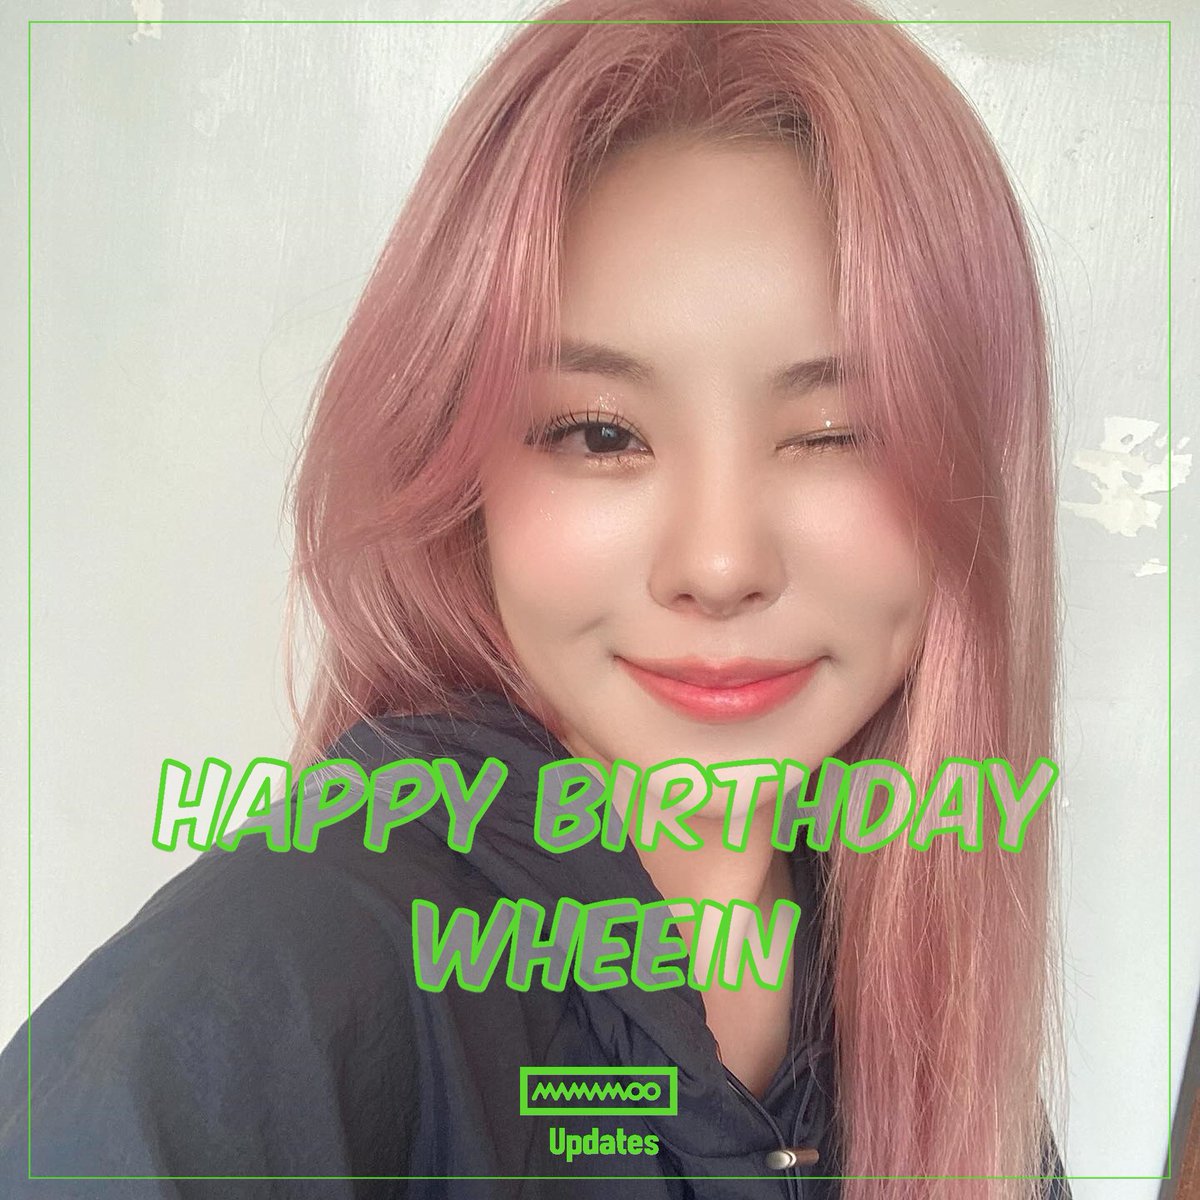 Happy Birthday Wheein! May our little butterfly keep flying high! 30TH FLIGHTS WITH WHEEIN #ThirtySexy_WheeinDay #확실한_확신의행복_햅휘데이